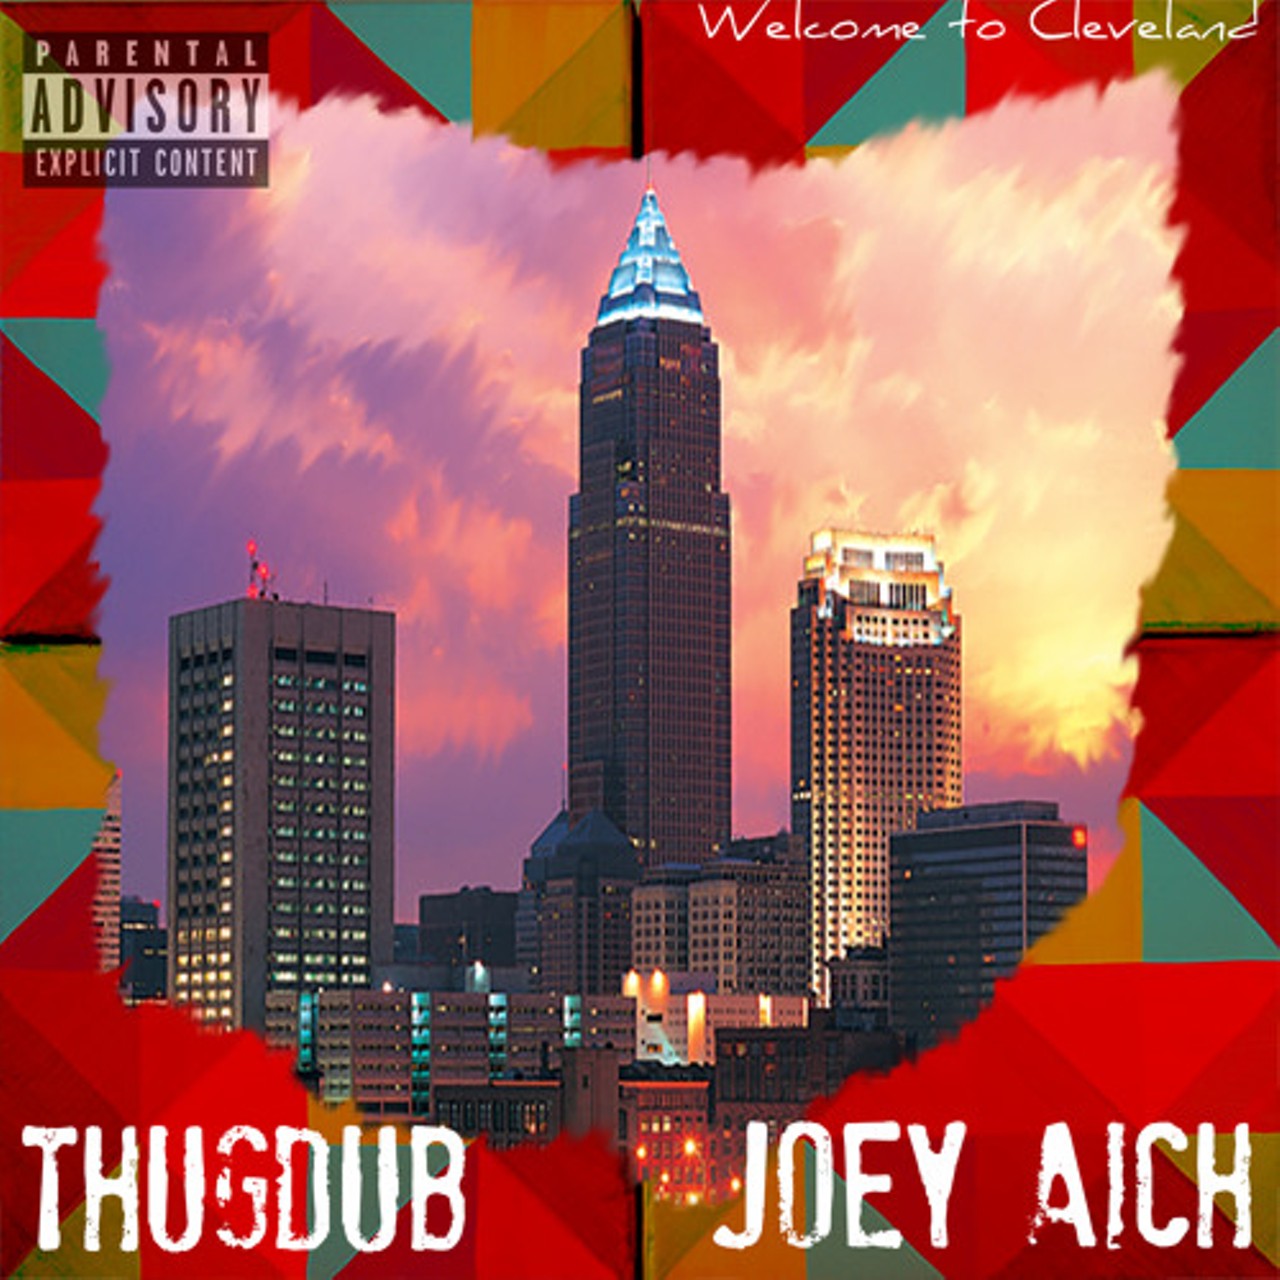  "Welcome to Cleveland" by ThugDub ft. Joey Aich  
"Straight from South Carolina to Cleveland," ThugDub announces on this track. He brings boom bap style with him from the East Coast to the Midwest. 
"Welcome to Cleveland" album art